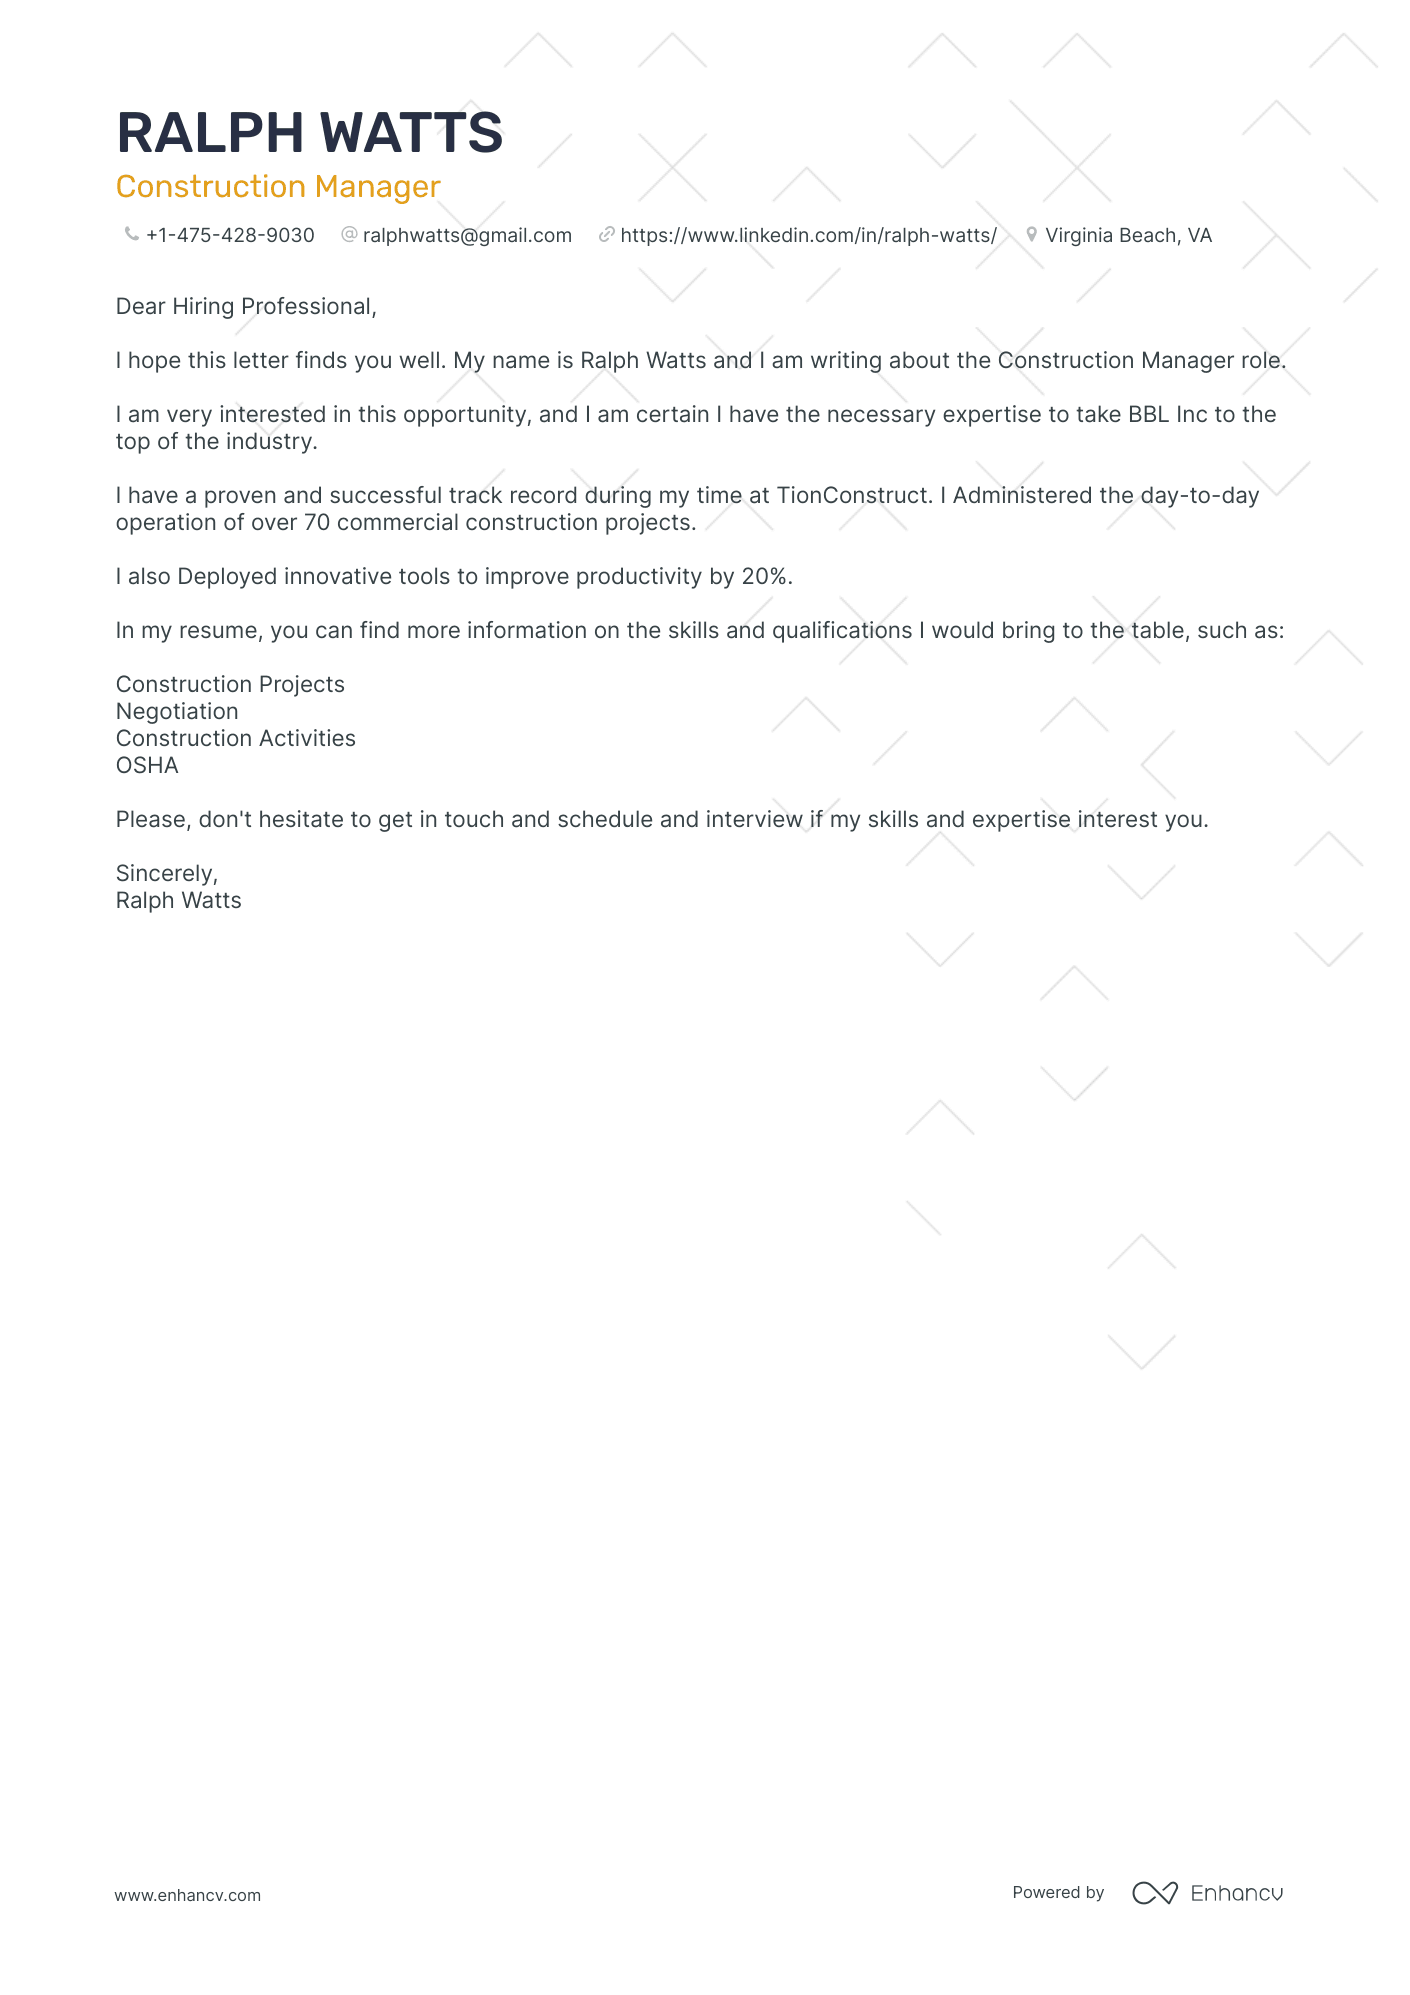 Construction Manager cover letter